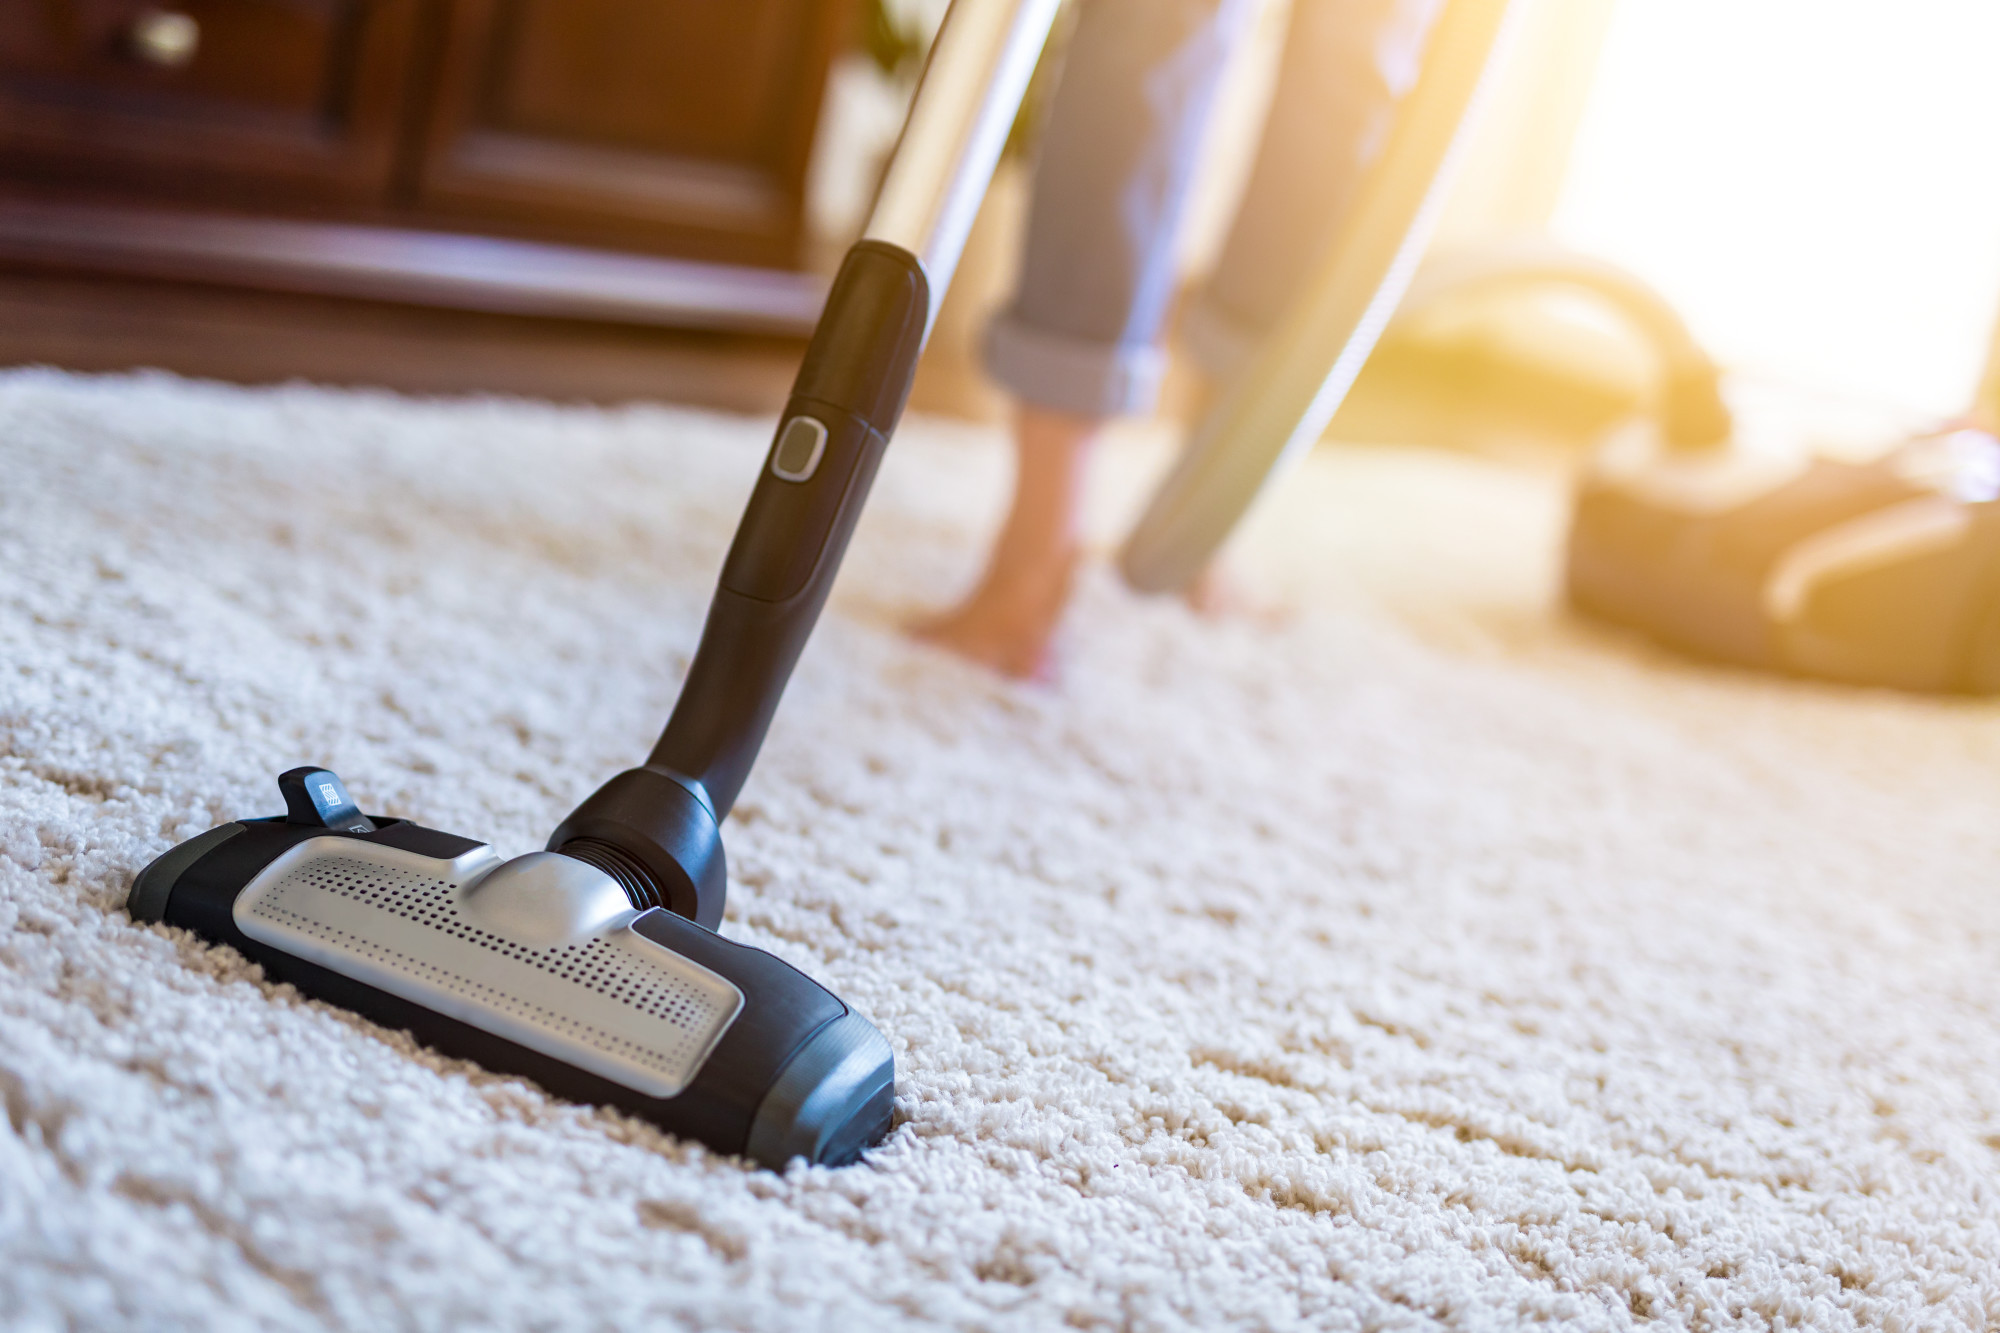 Rugs absorb much more dirt and grime than they appear to, so don't underestimate it. Hire a rug cleaning business to obtain the following advantages.